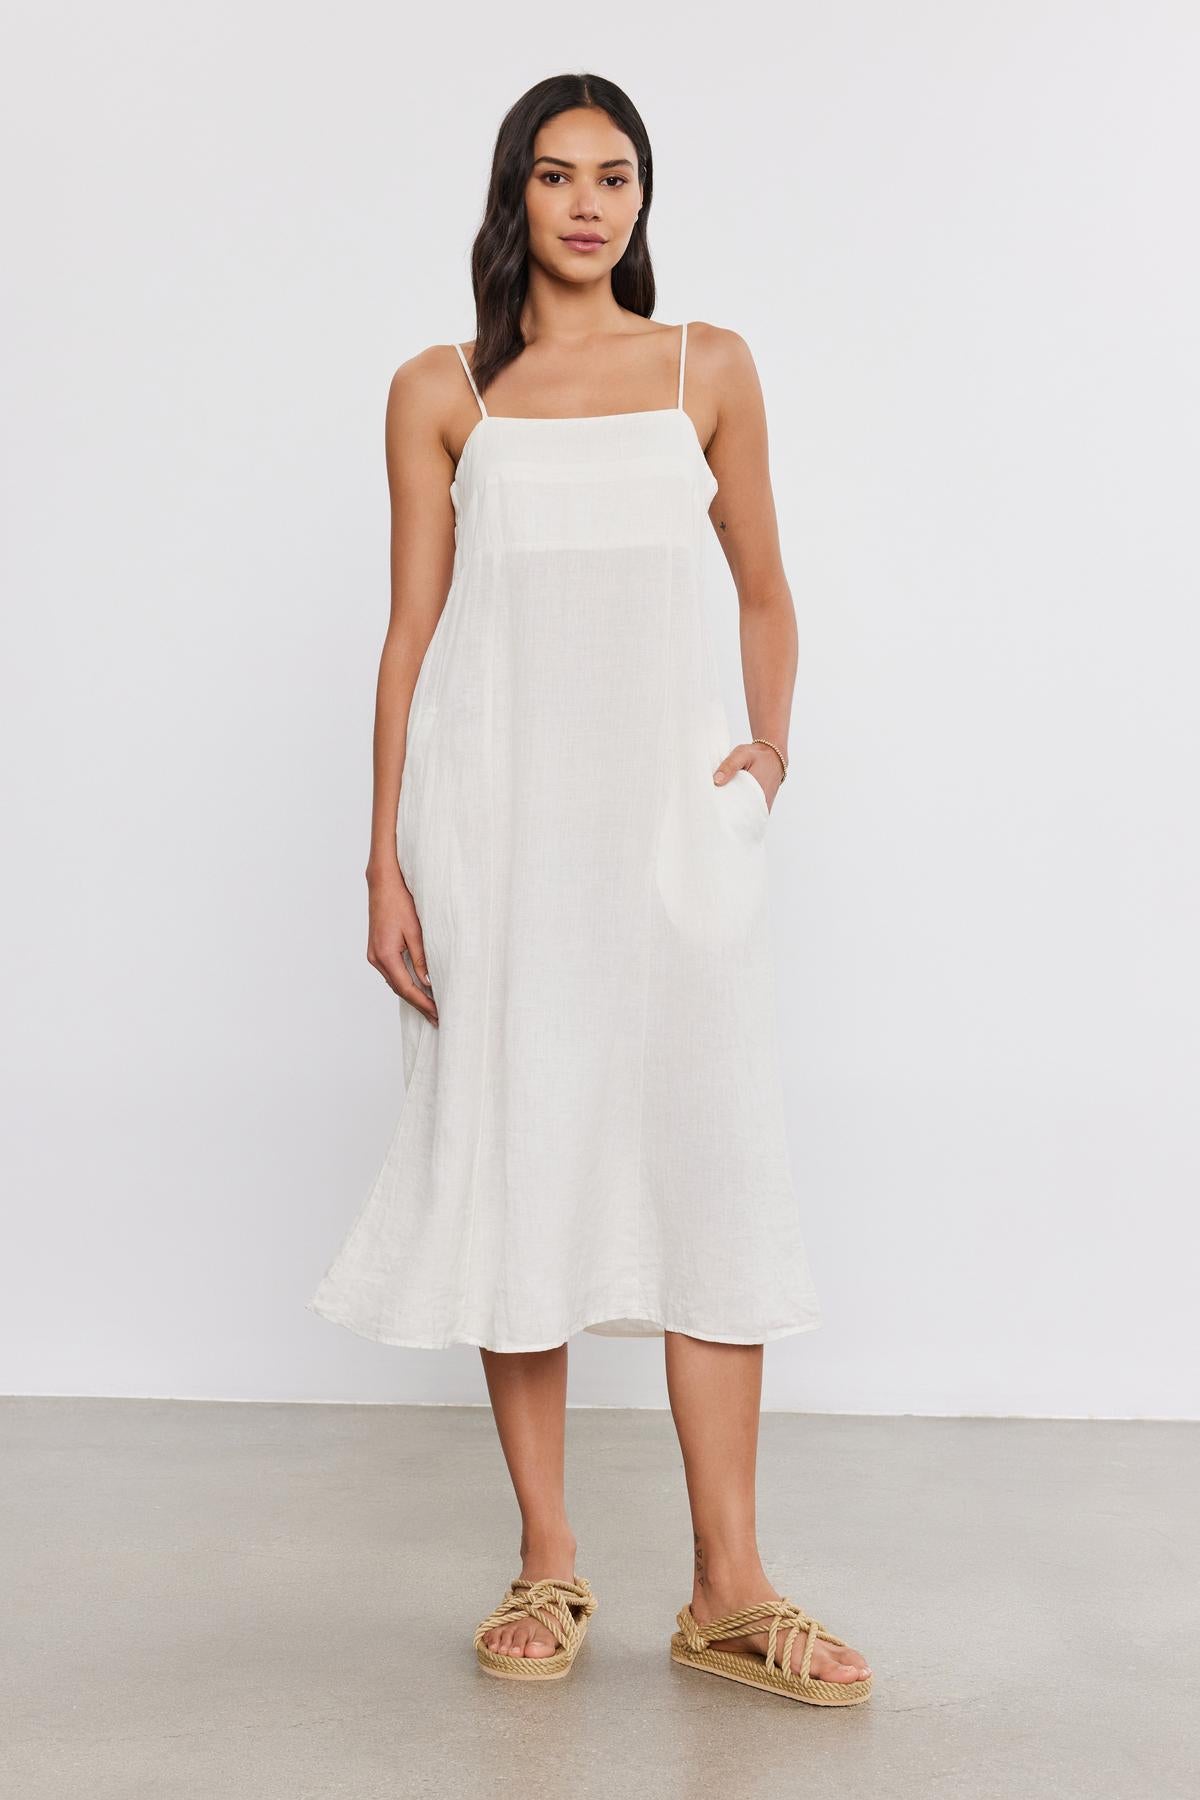 A woman standing in a studio, wearing a white sleeveless Stephie Linen dress by Velvet by Graham & Spencer and straw sandals, and holding a white clutch.-36752944955585